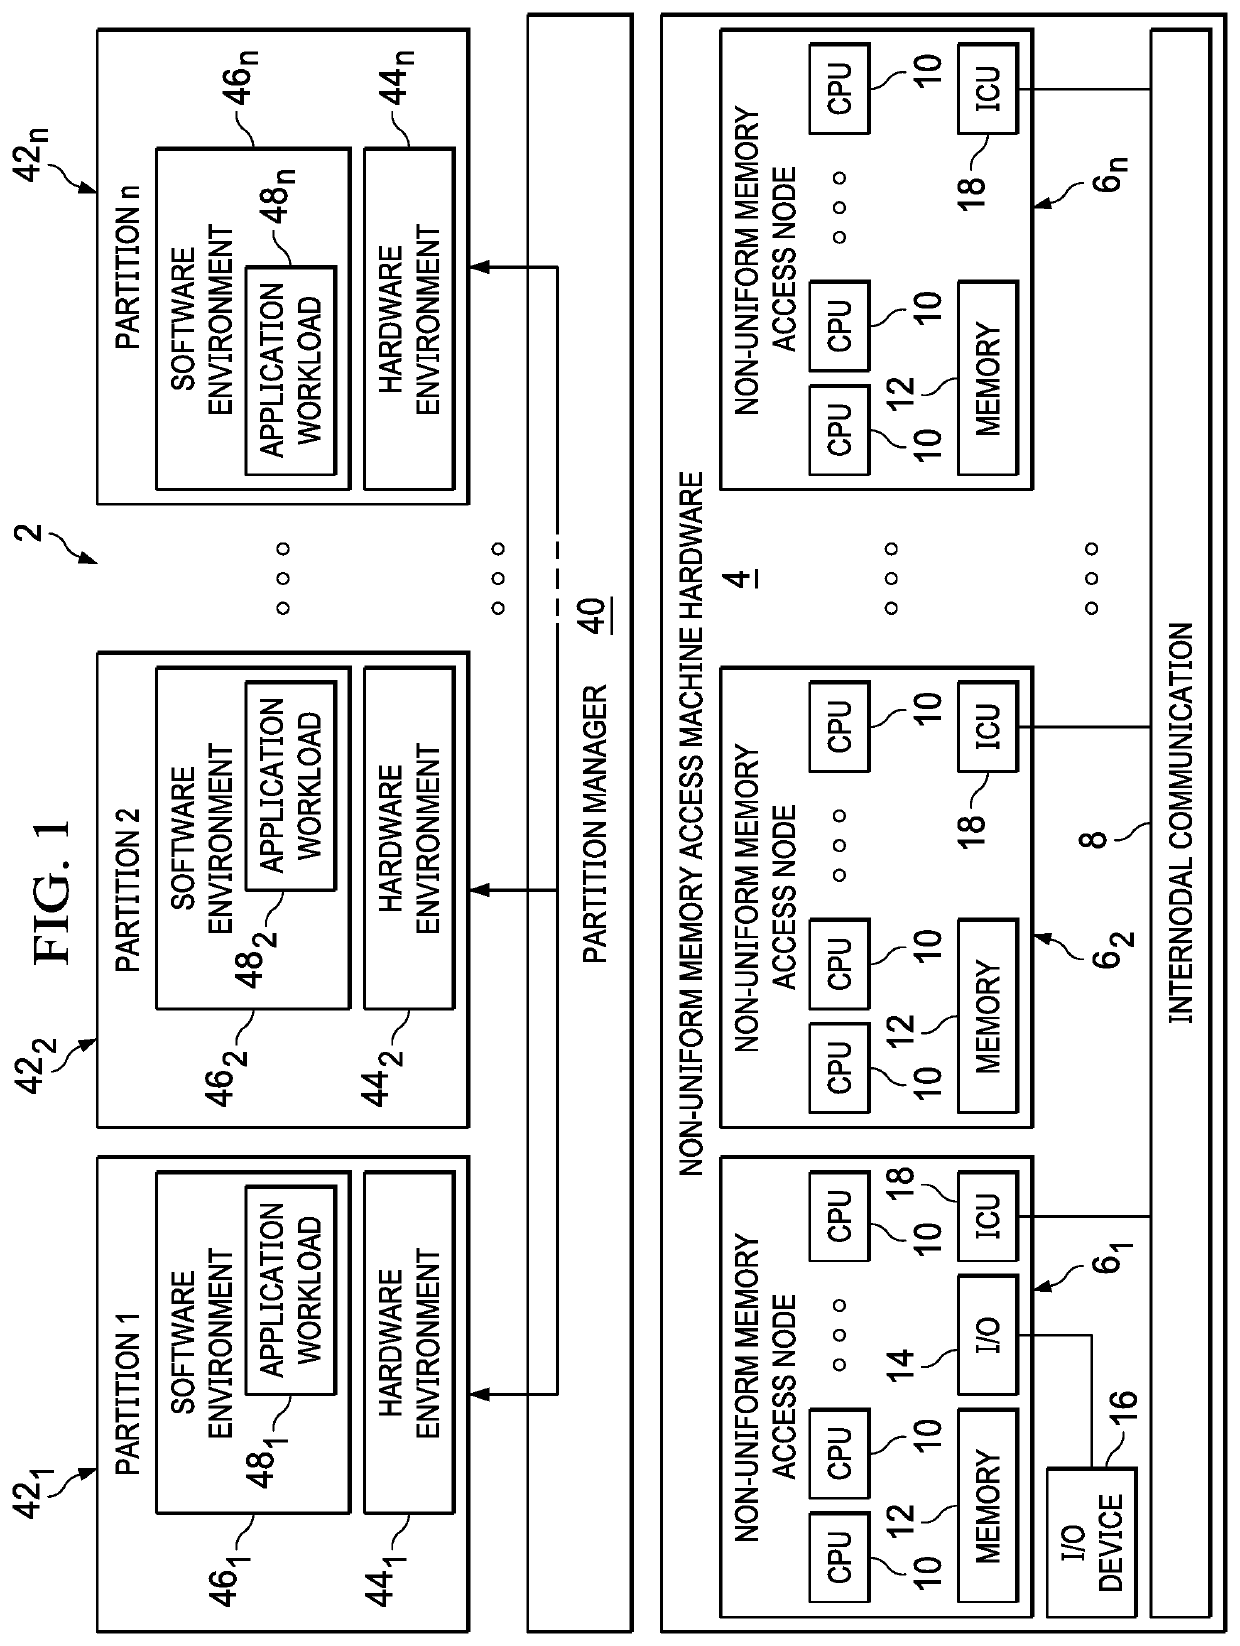 Protecting an application by autonomously limiting processing to a determined hardware capacity